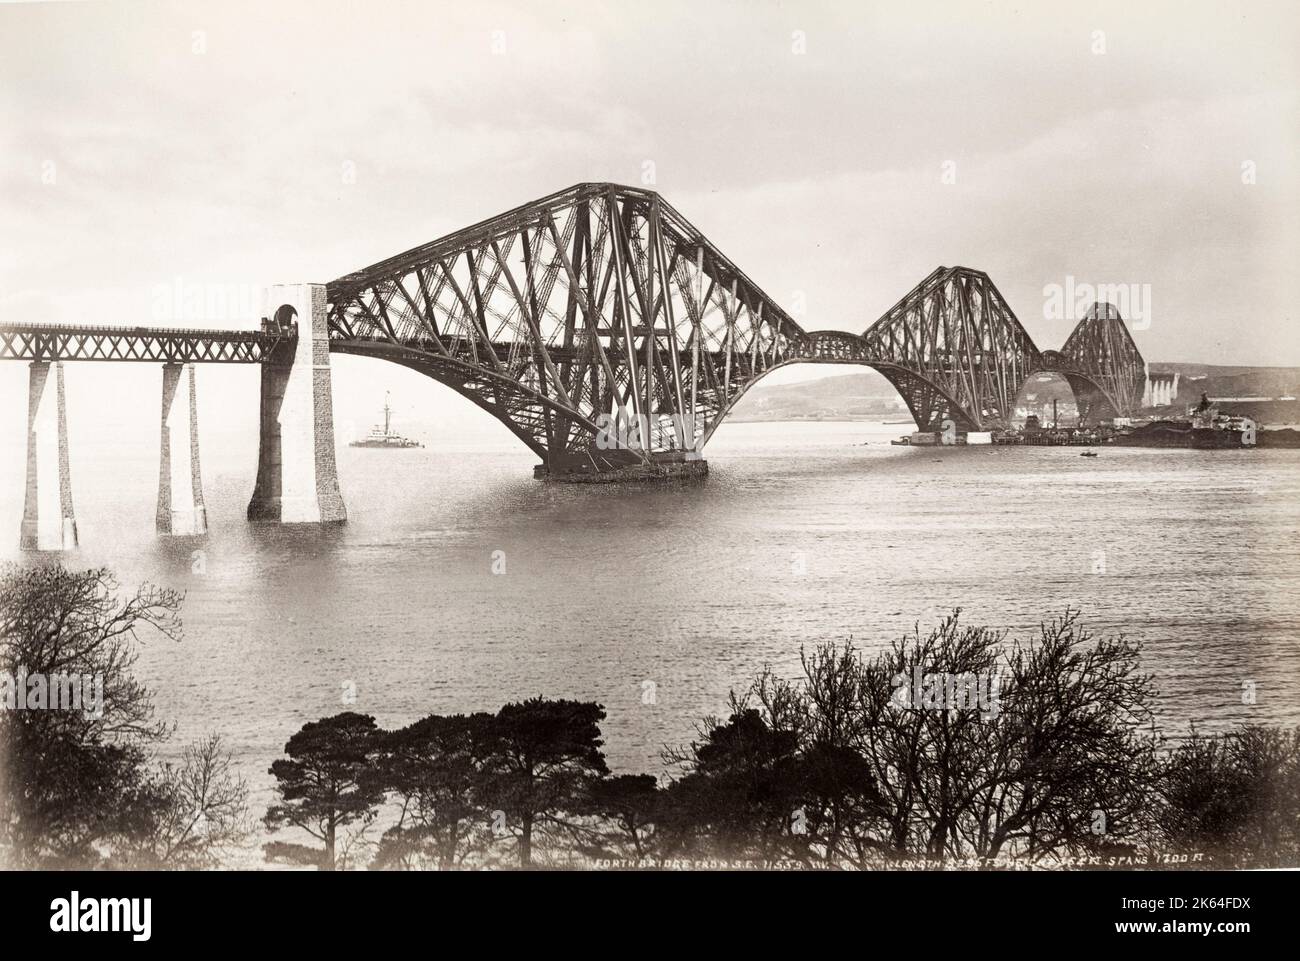 19th century vintage photograph: view of the railway bridge over the Firth of Forth, Scotland, seen from the south bank of the river. c.1890's. Stock Photo